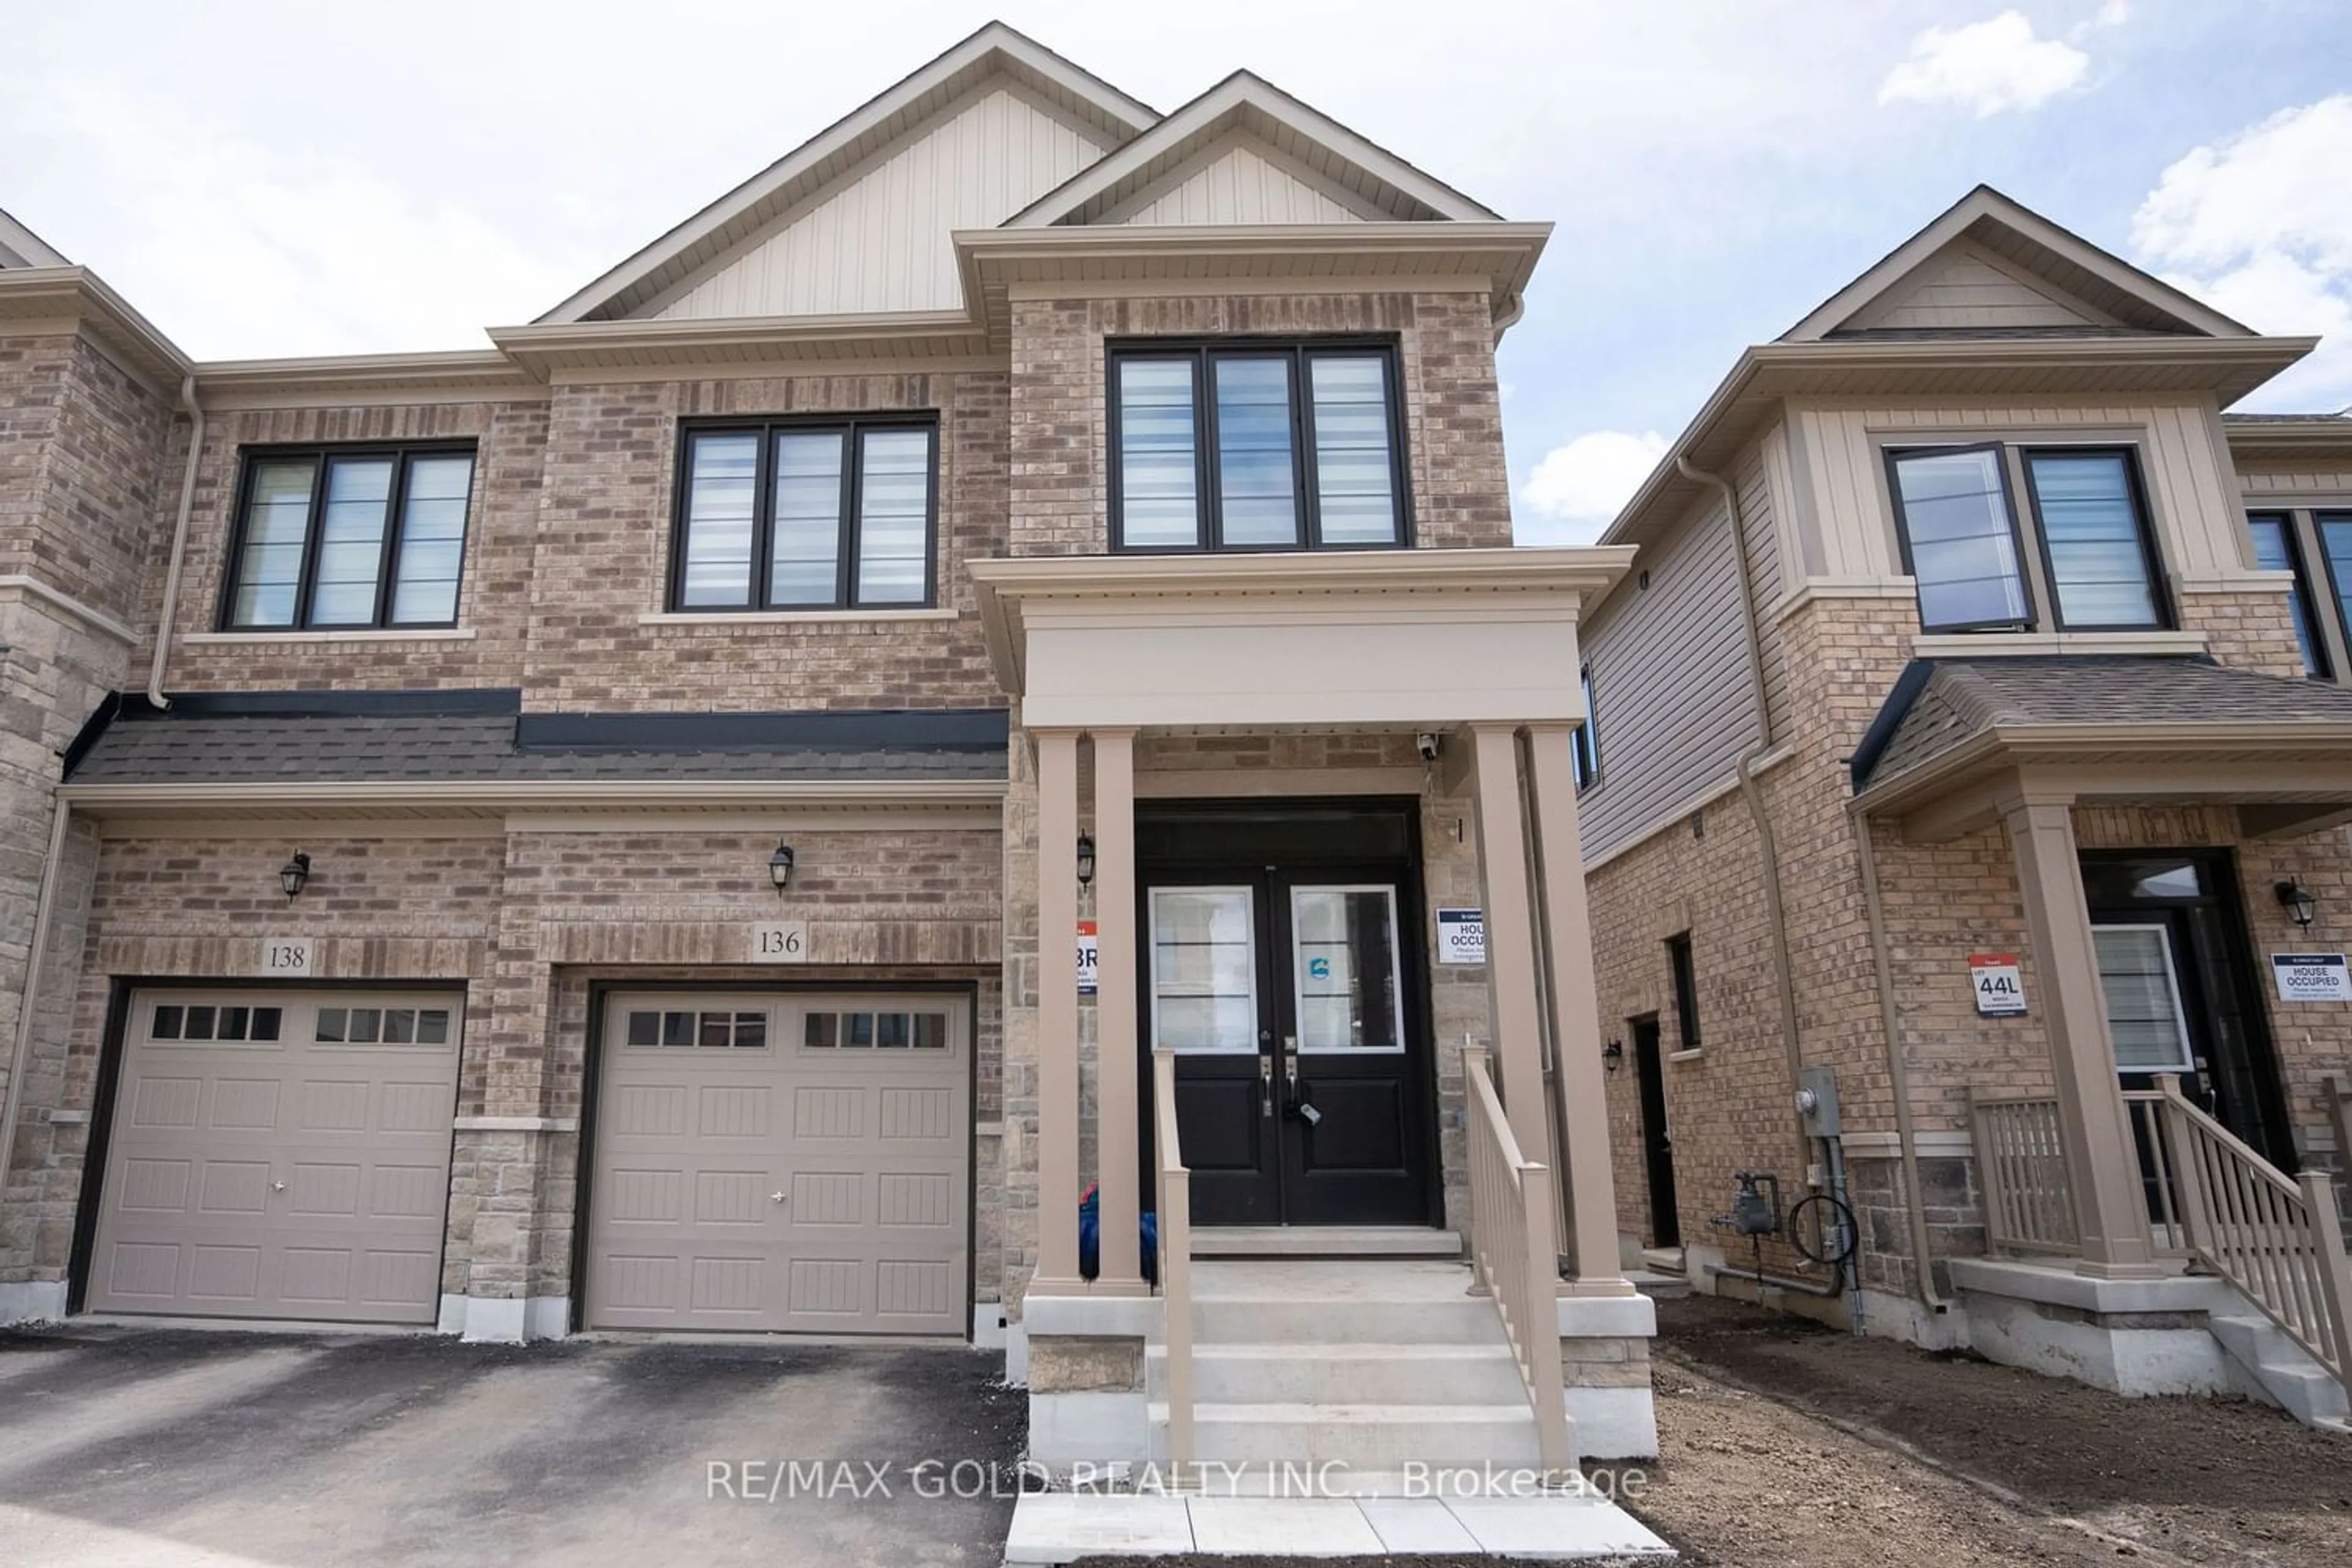 Home with brick exterior material for 136 Shepherd Dr, Barrie Ontario L9J 0C3